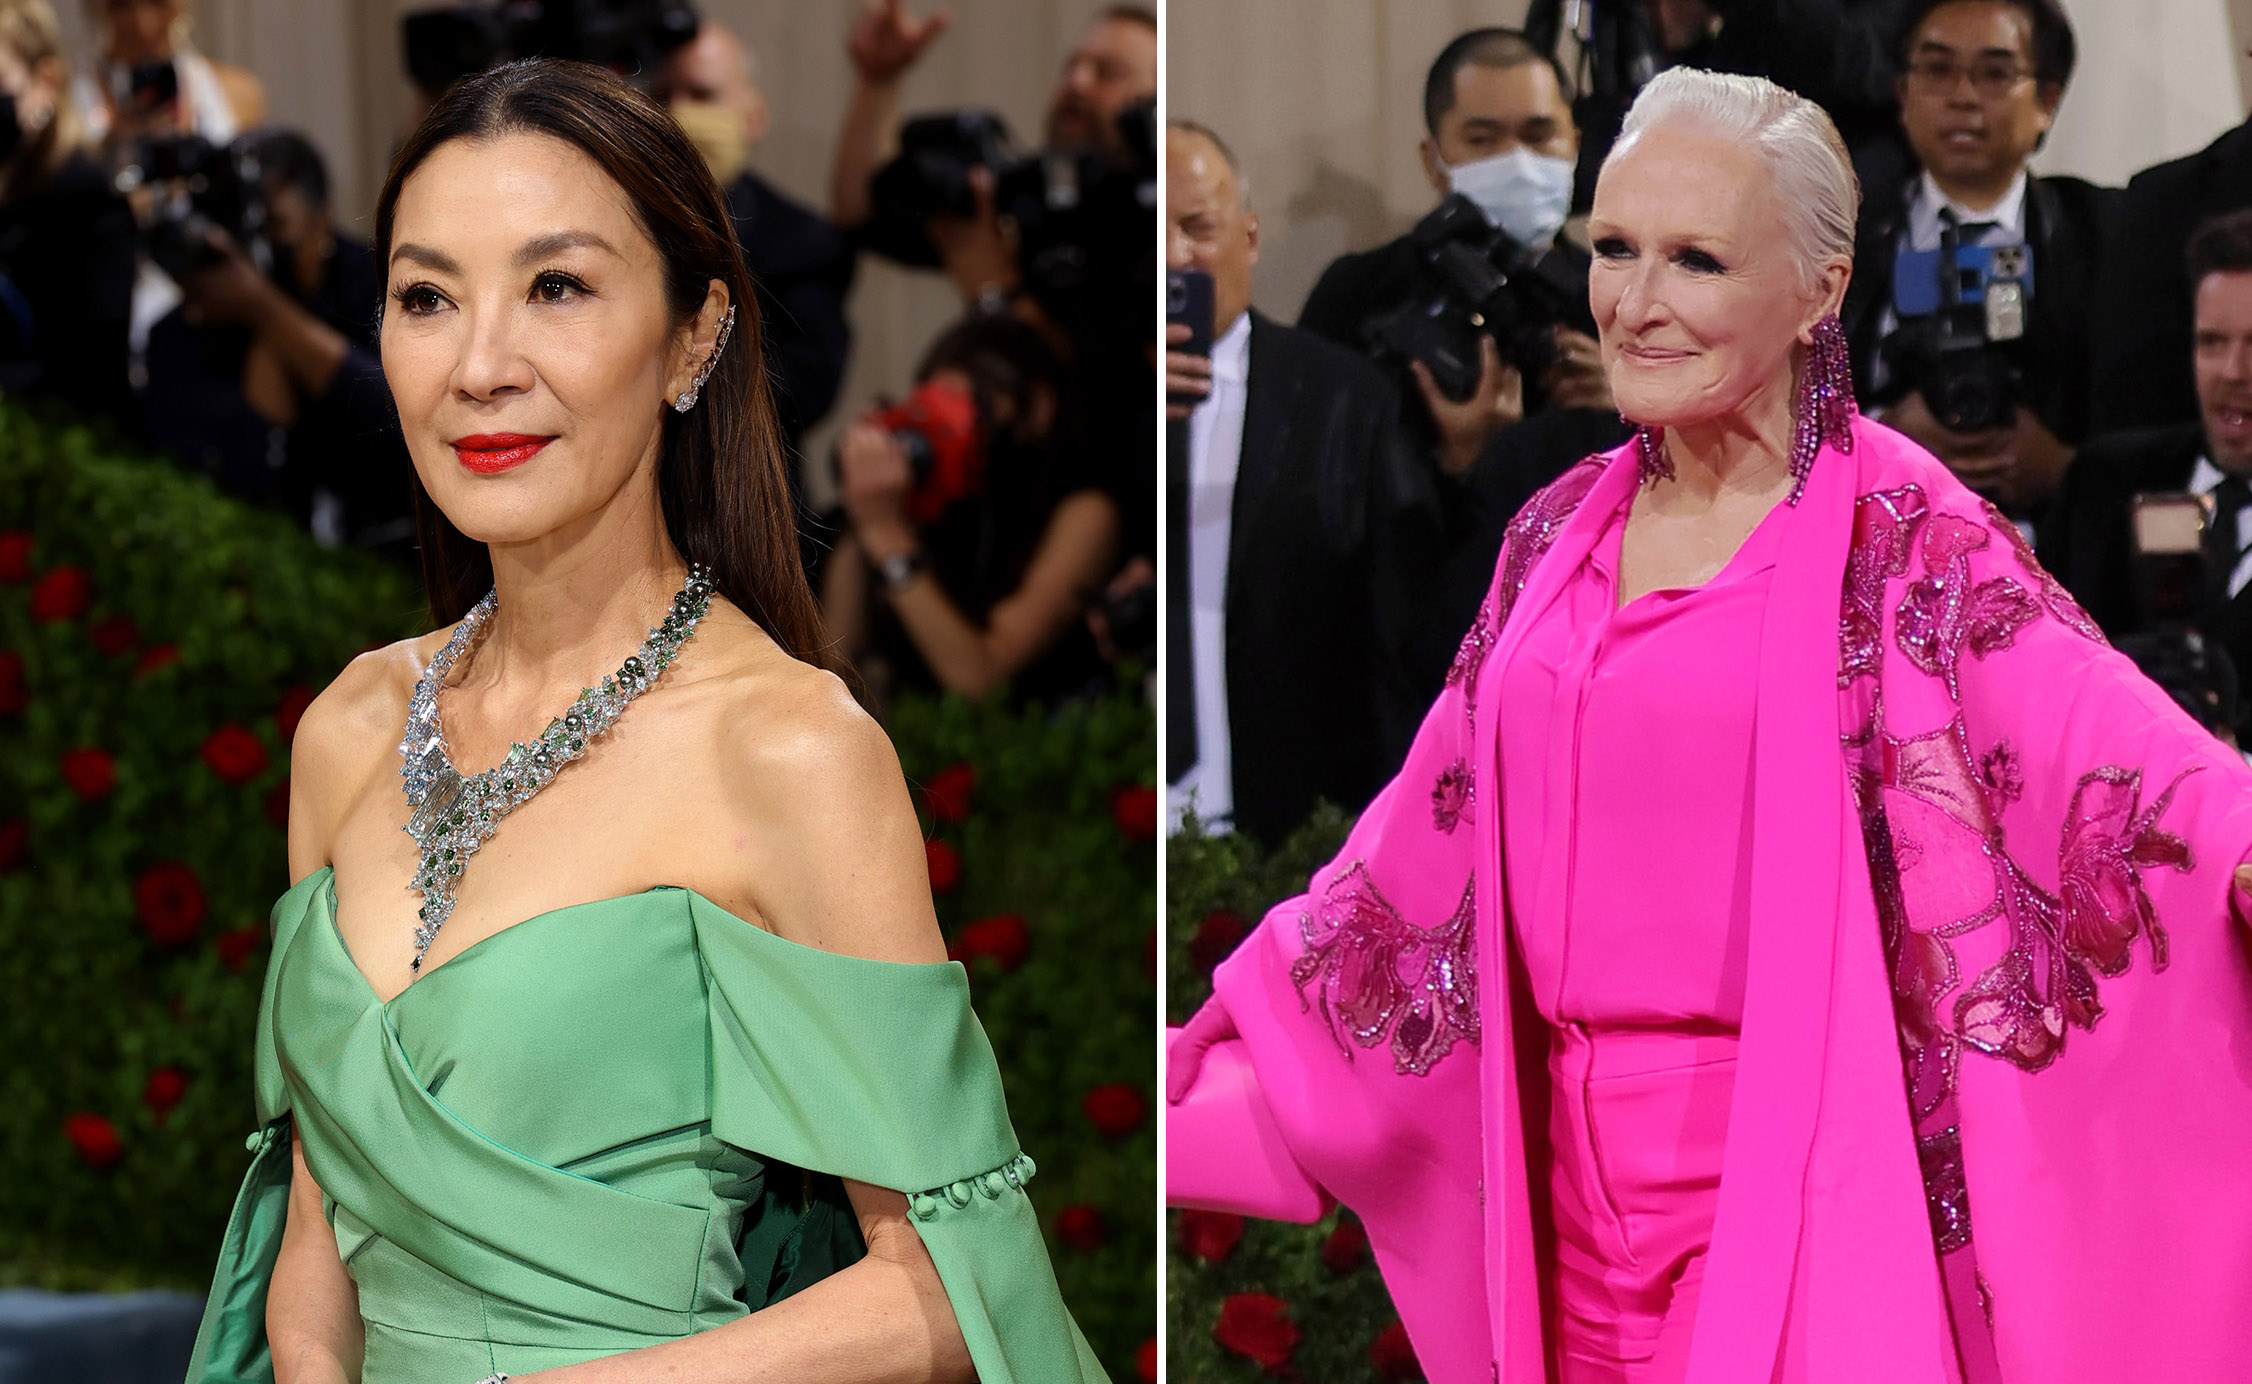 These Met Gala red carpet stars prove fashion doesn’t stop when you turn 50